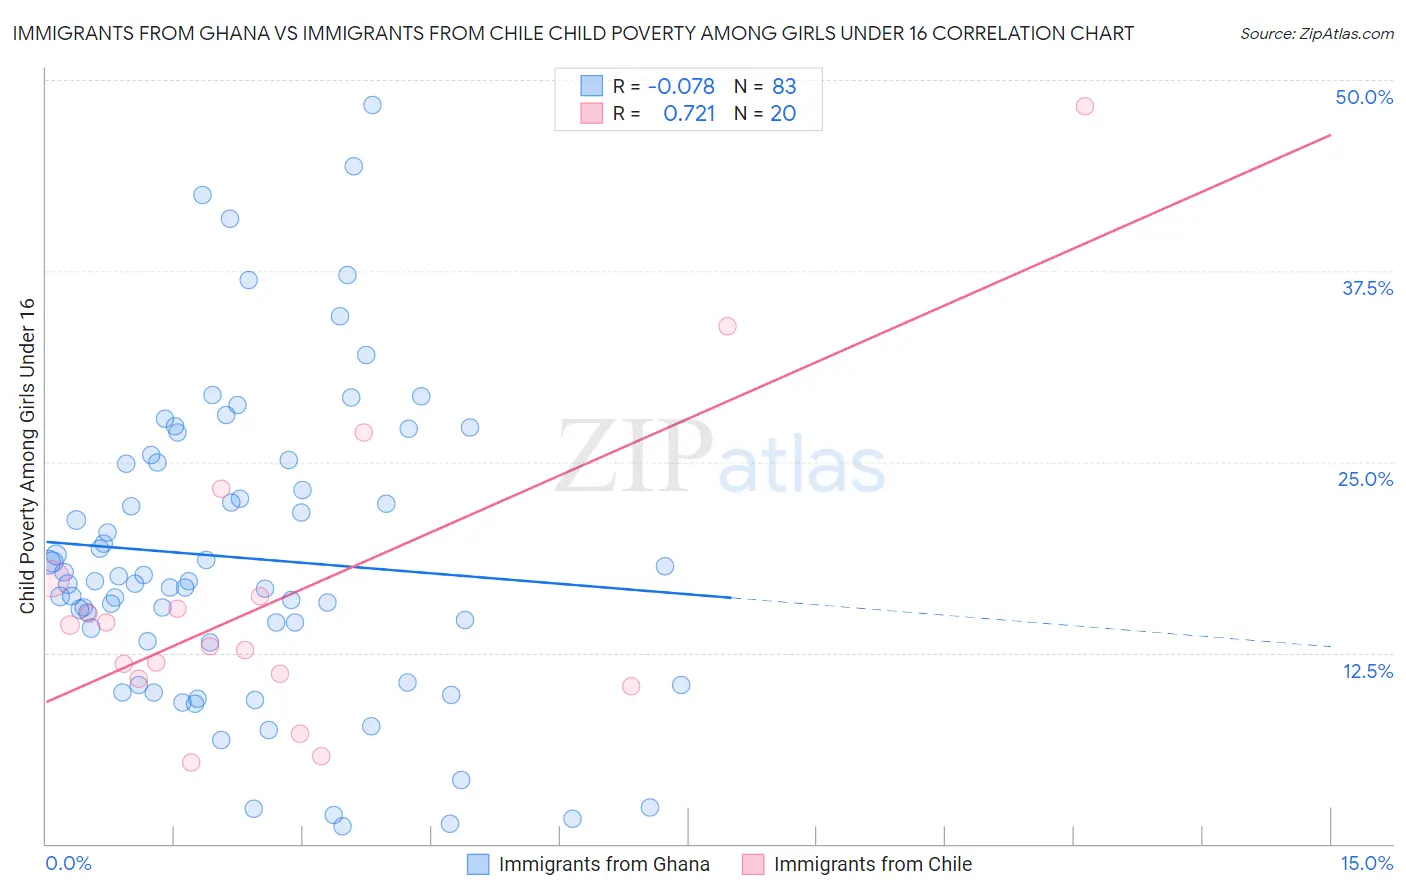 Immigrants from Ghana vs Immigrants from Chile Child Poverty Among Girls Under 16